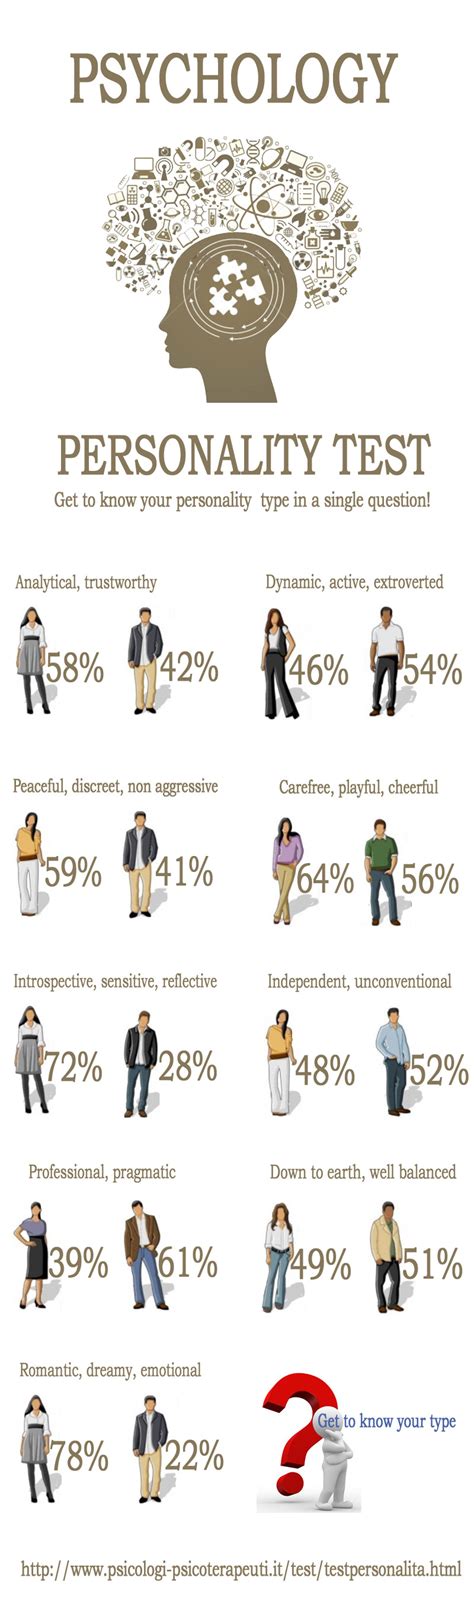 Psychology: Personality Test - Infographics | Graphs.net